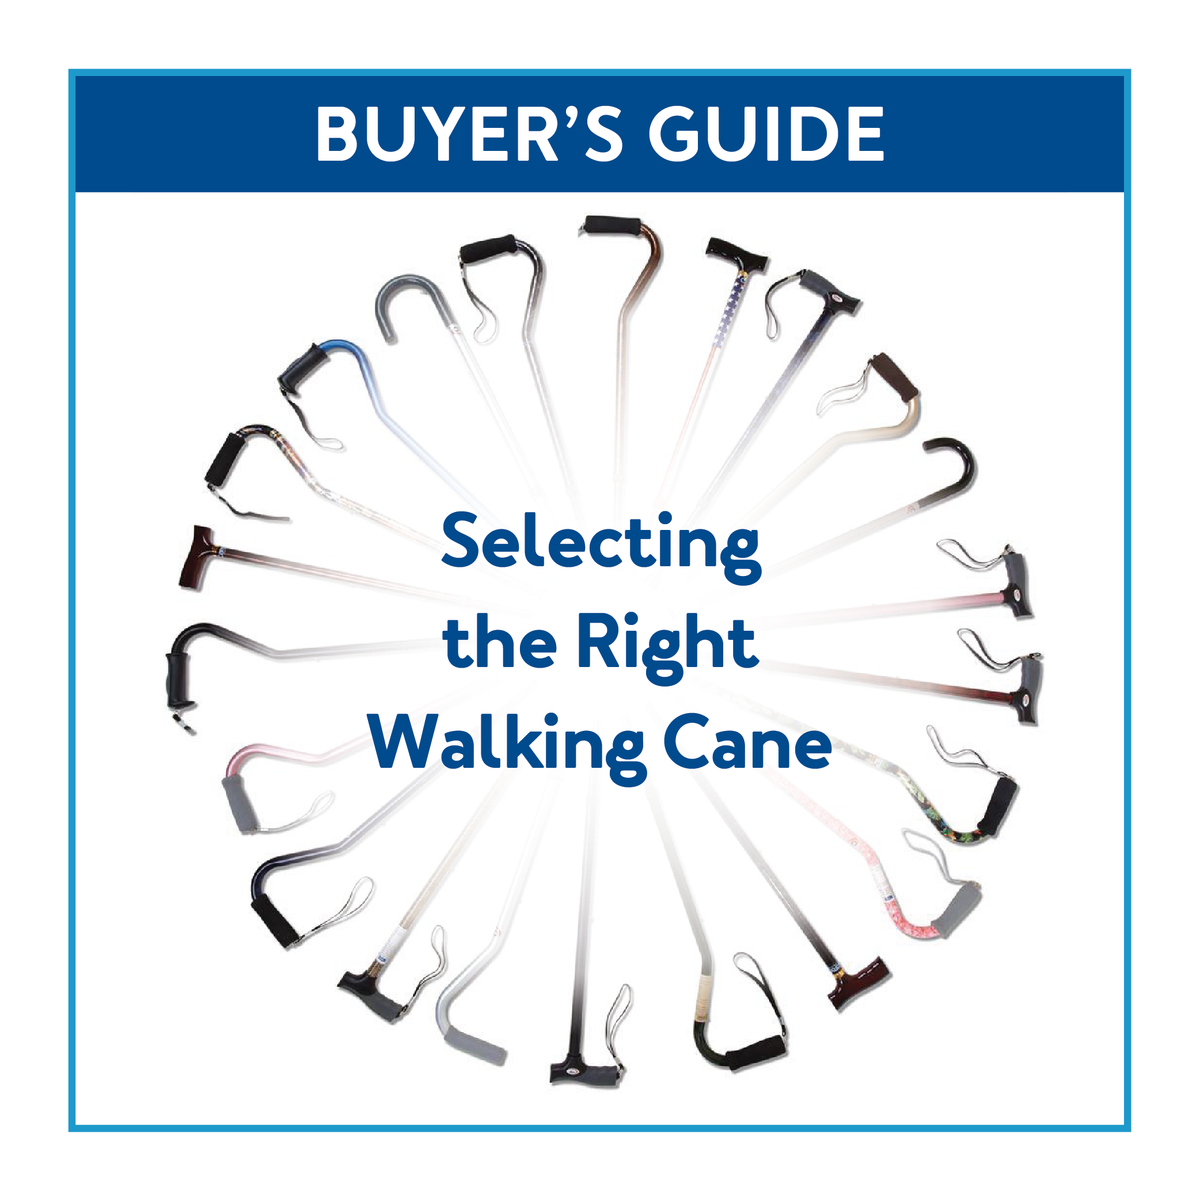 Walking canes arranged in a circle with text Buyer’s Guide: Selecting the Right Walking Cane.